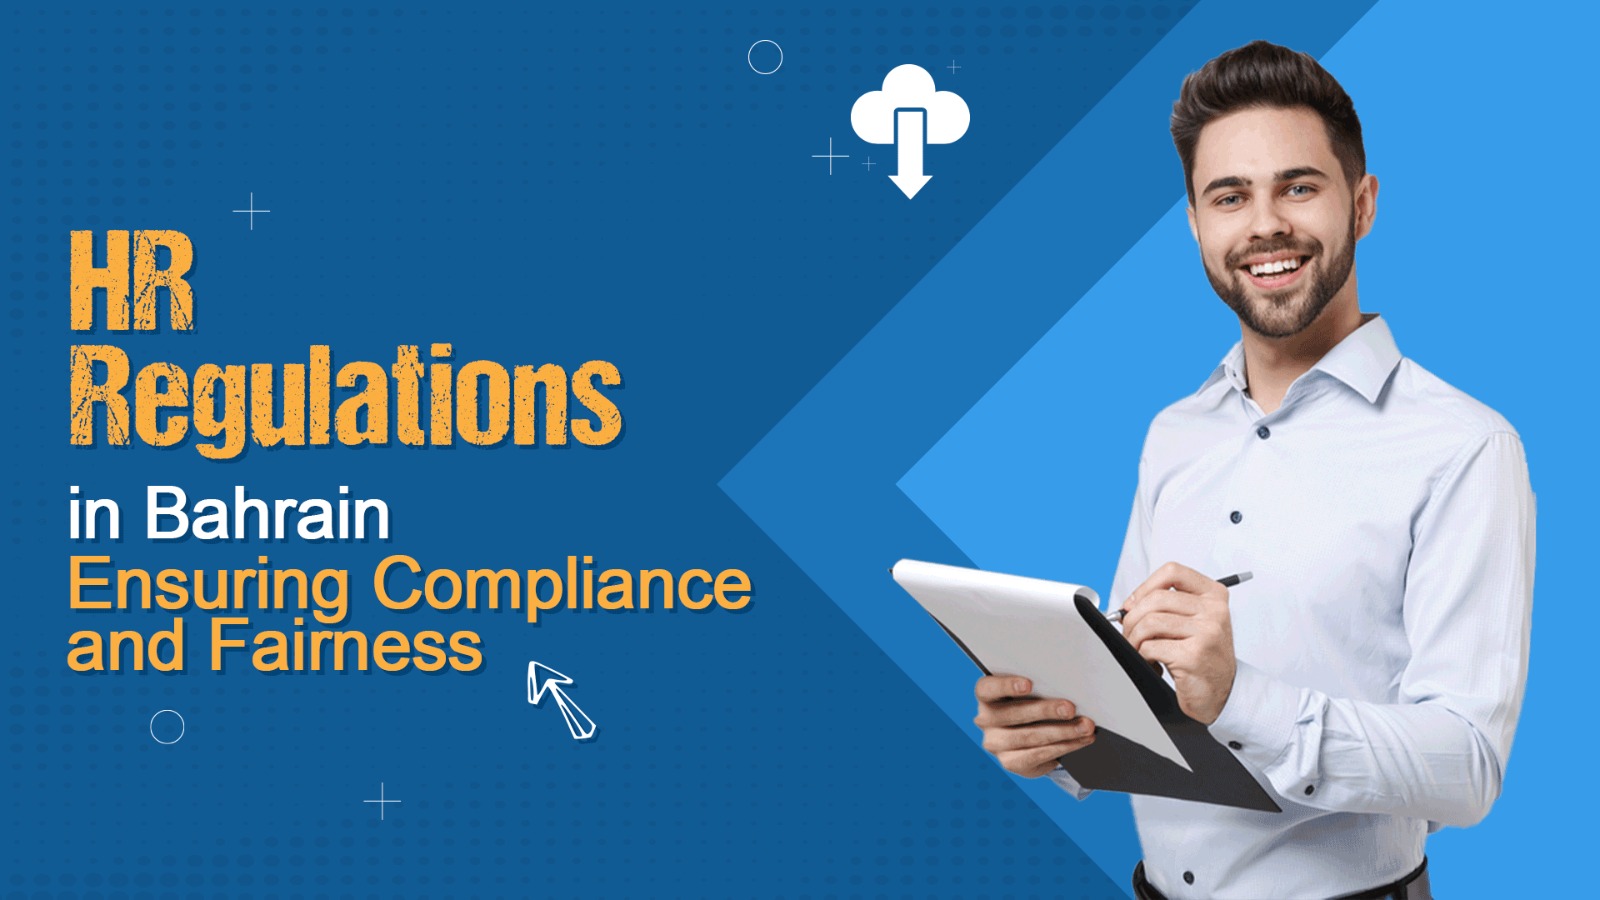 HR Regulations in Bahrain: Ensuring Compliance and Fairness